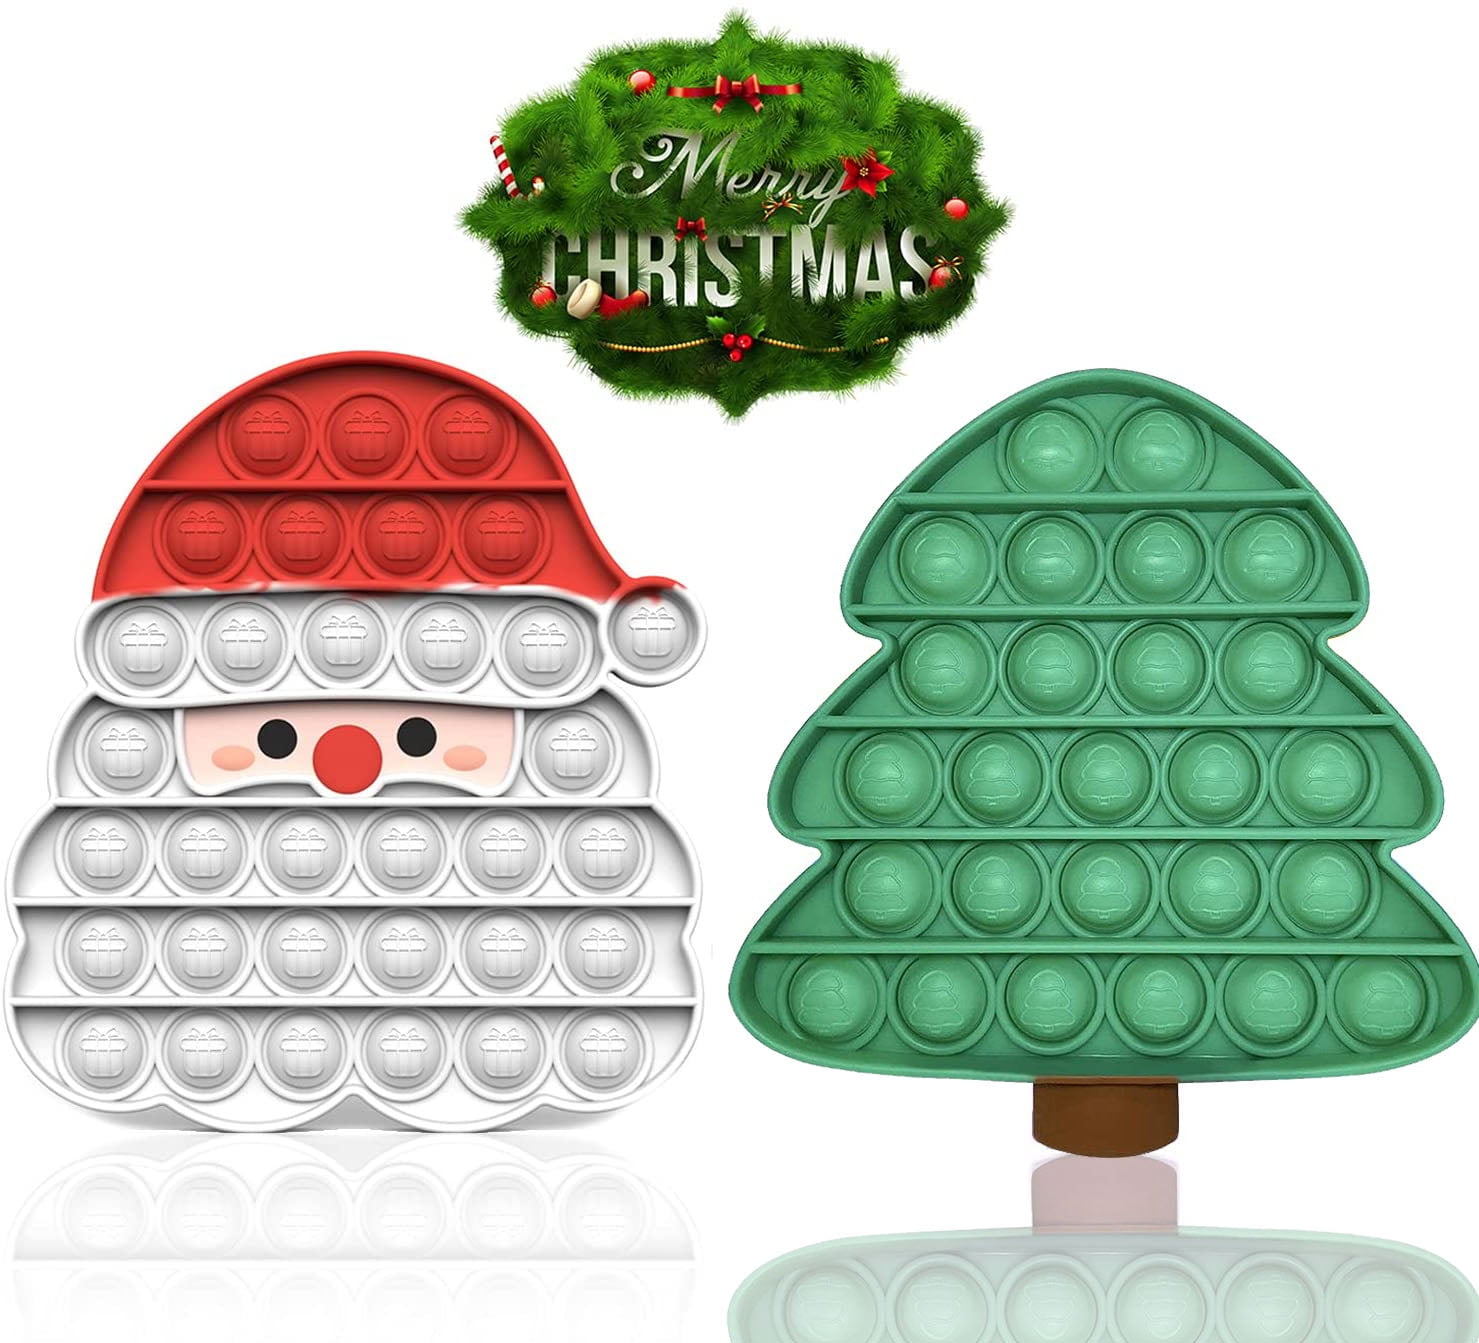 Adults Popper Gift for Kids Teens Christmas Pop Fidget Toys 3 Pack） Santa Claus Tree Silicone Sensory Gadget for Stress Push Pop Bubble Squeeze Toy Children Gingerbread Man Decorations 